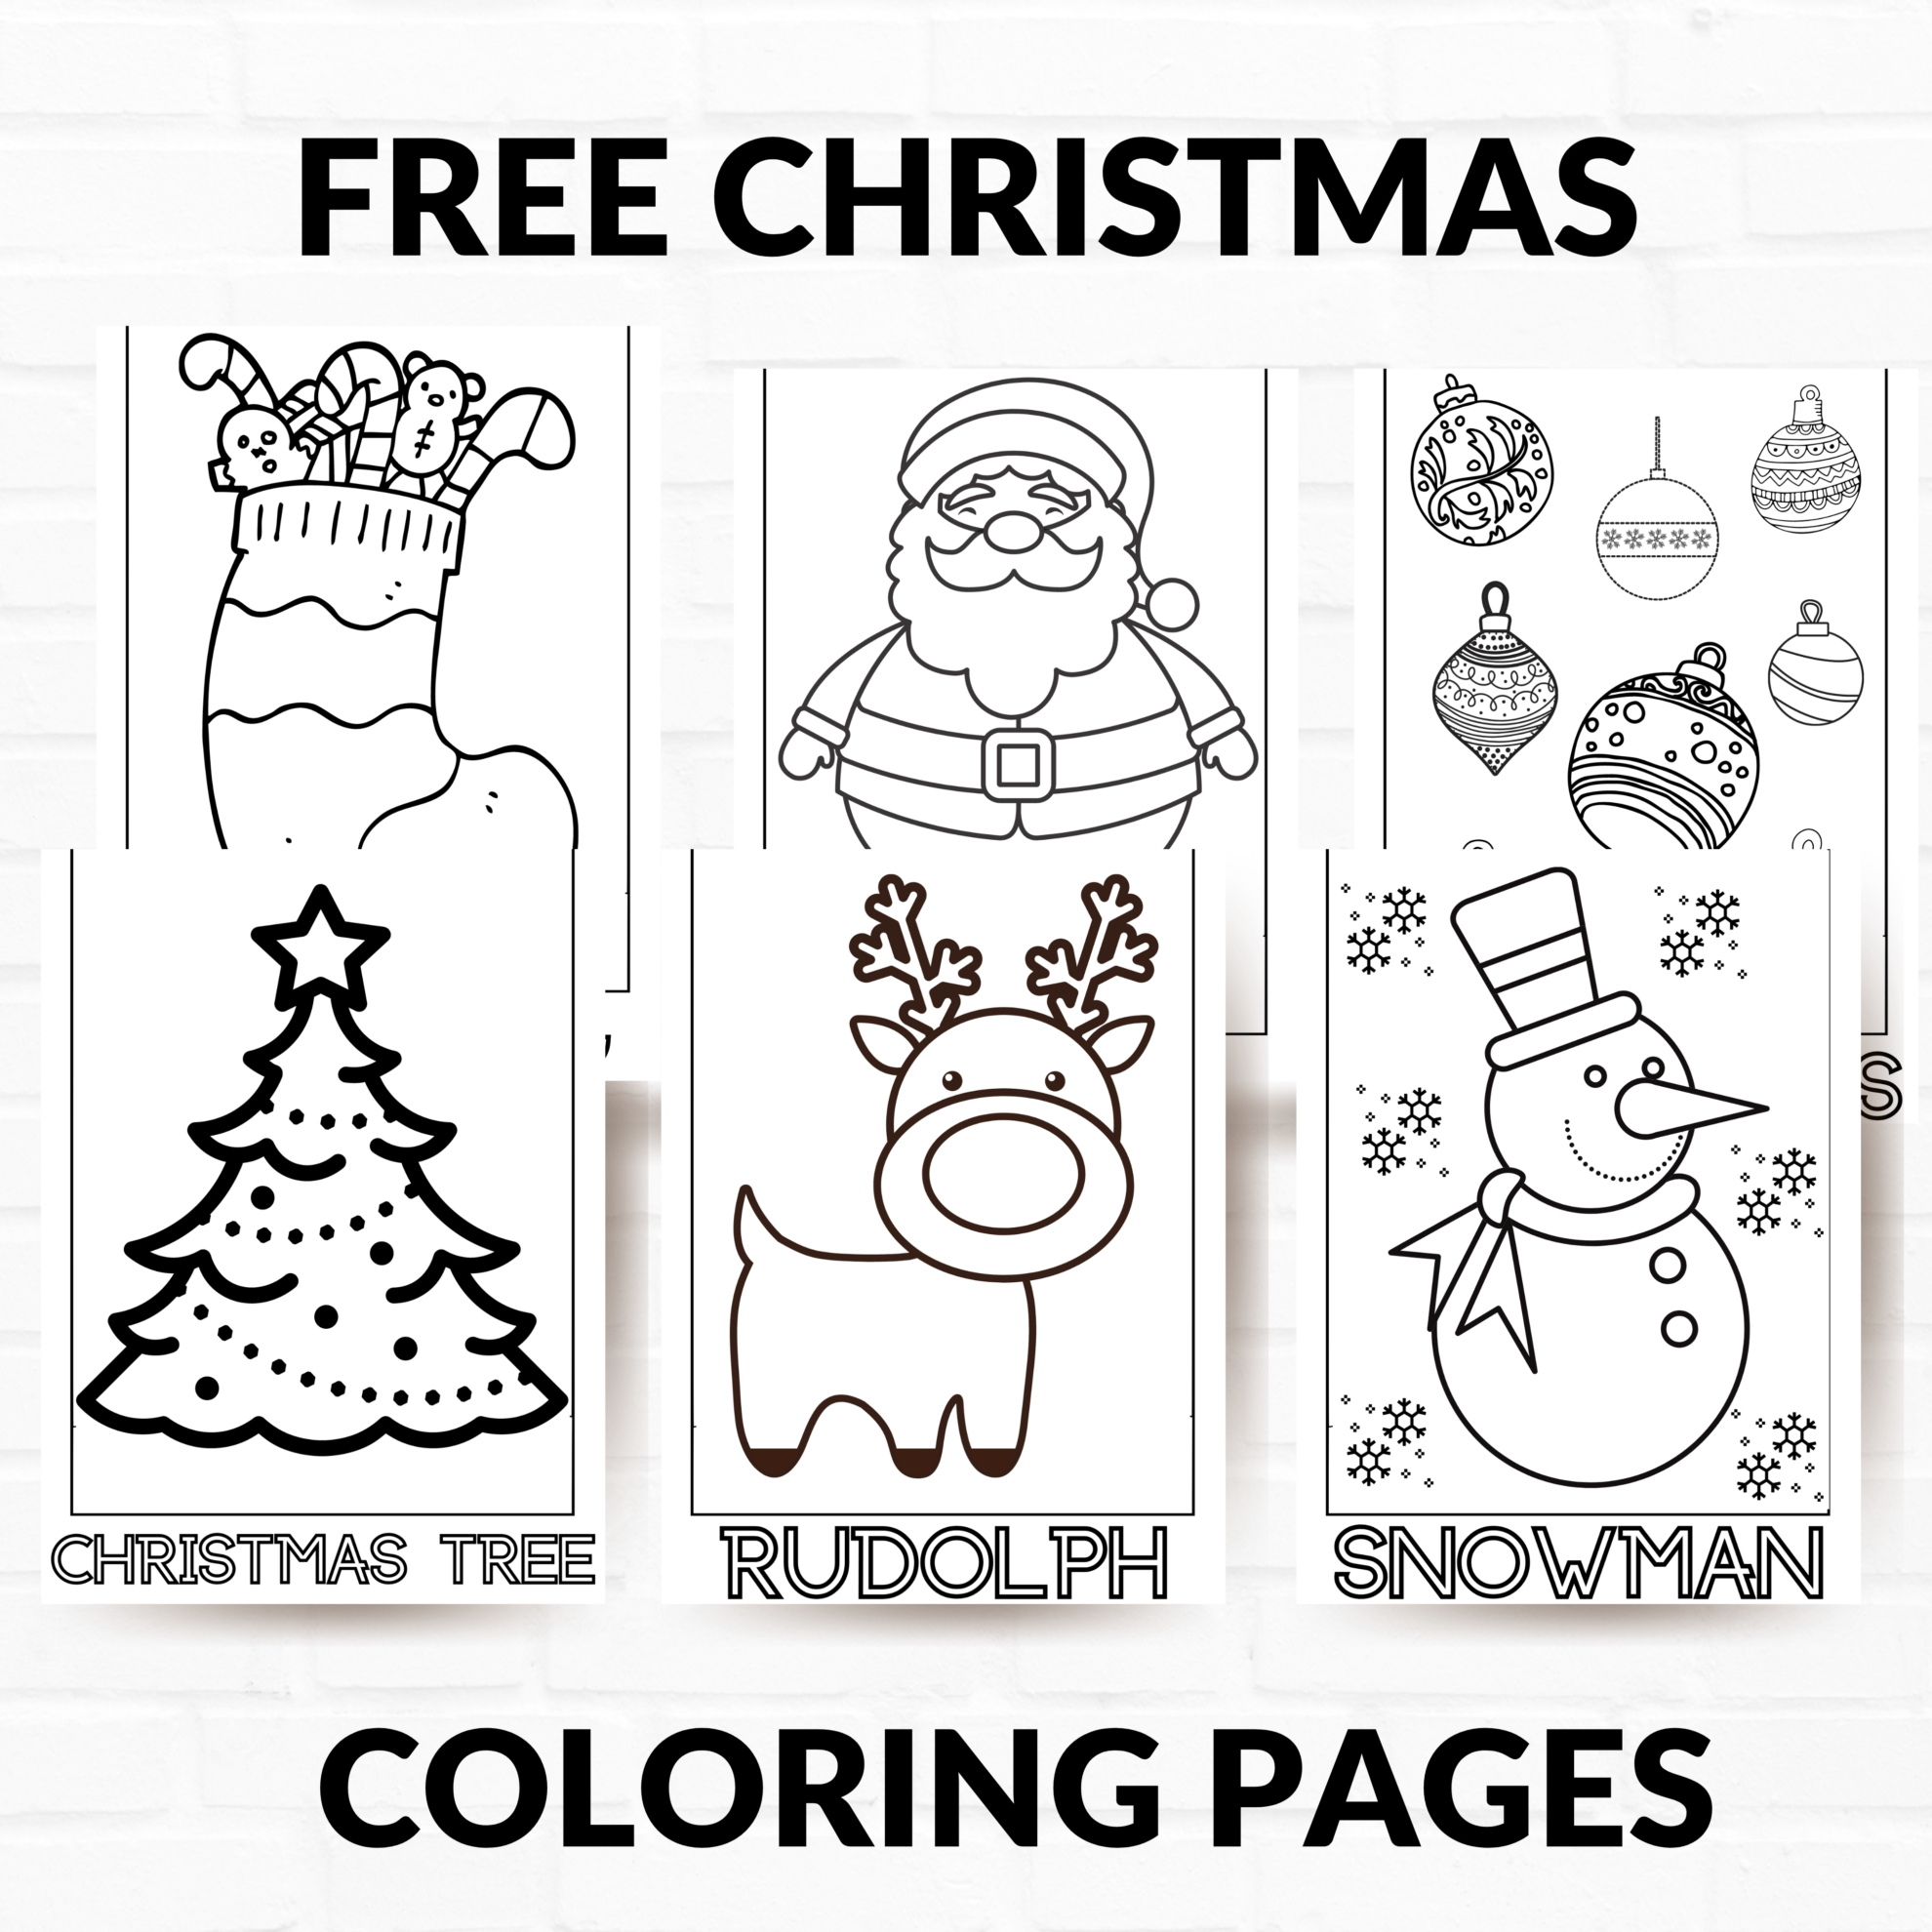 Free Printable Christmas Coloring Pages - About A Mom - Free Printable Christmas Pictures To Colour